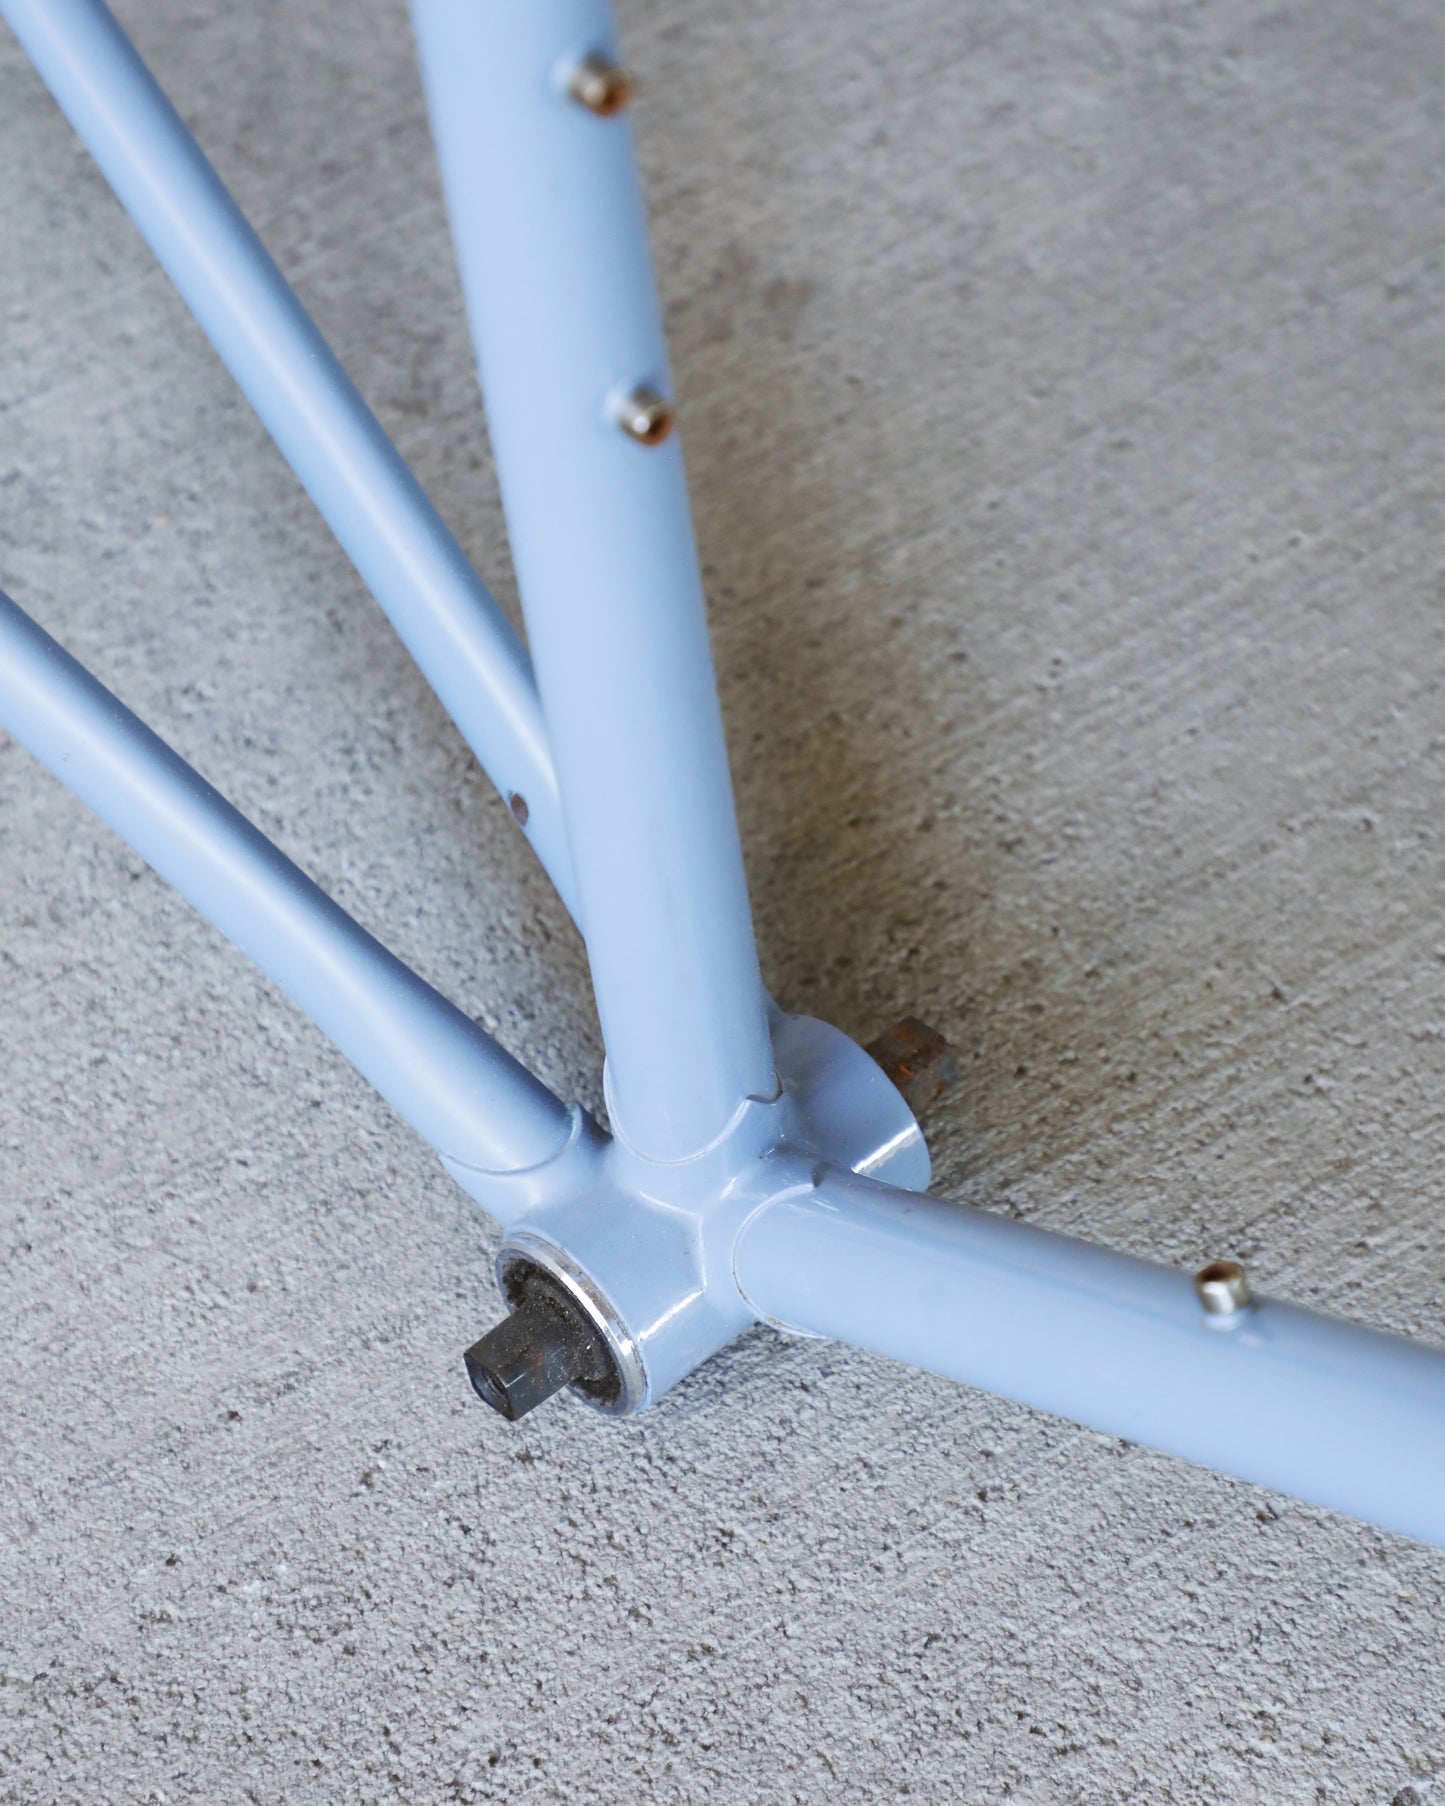 Unbranded Steel/Lugged Road Frame